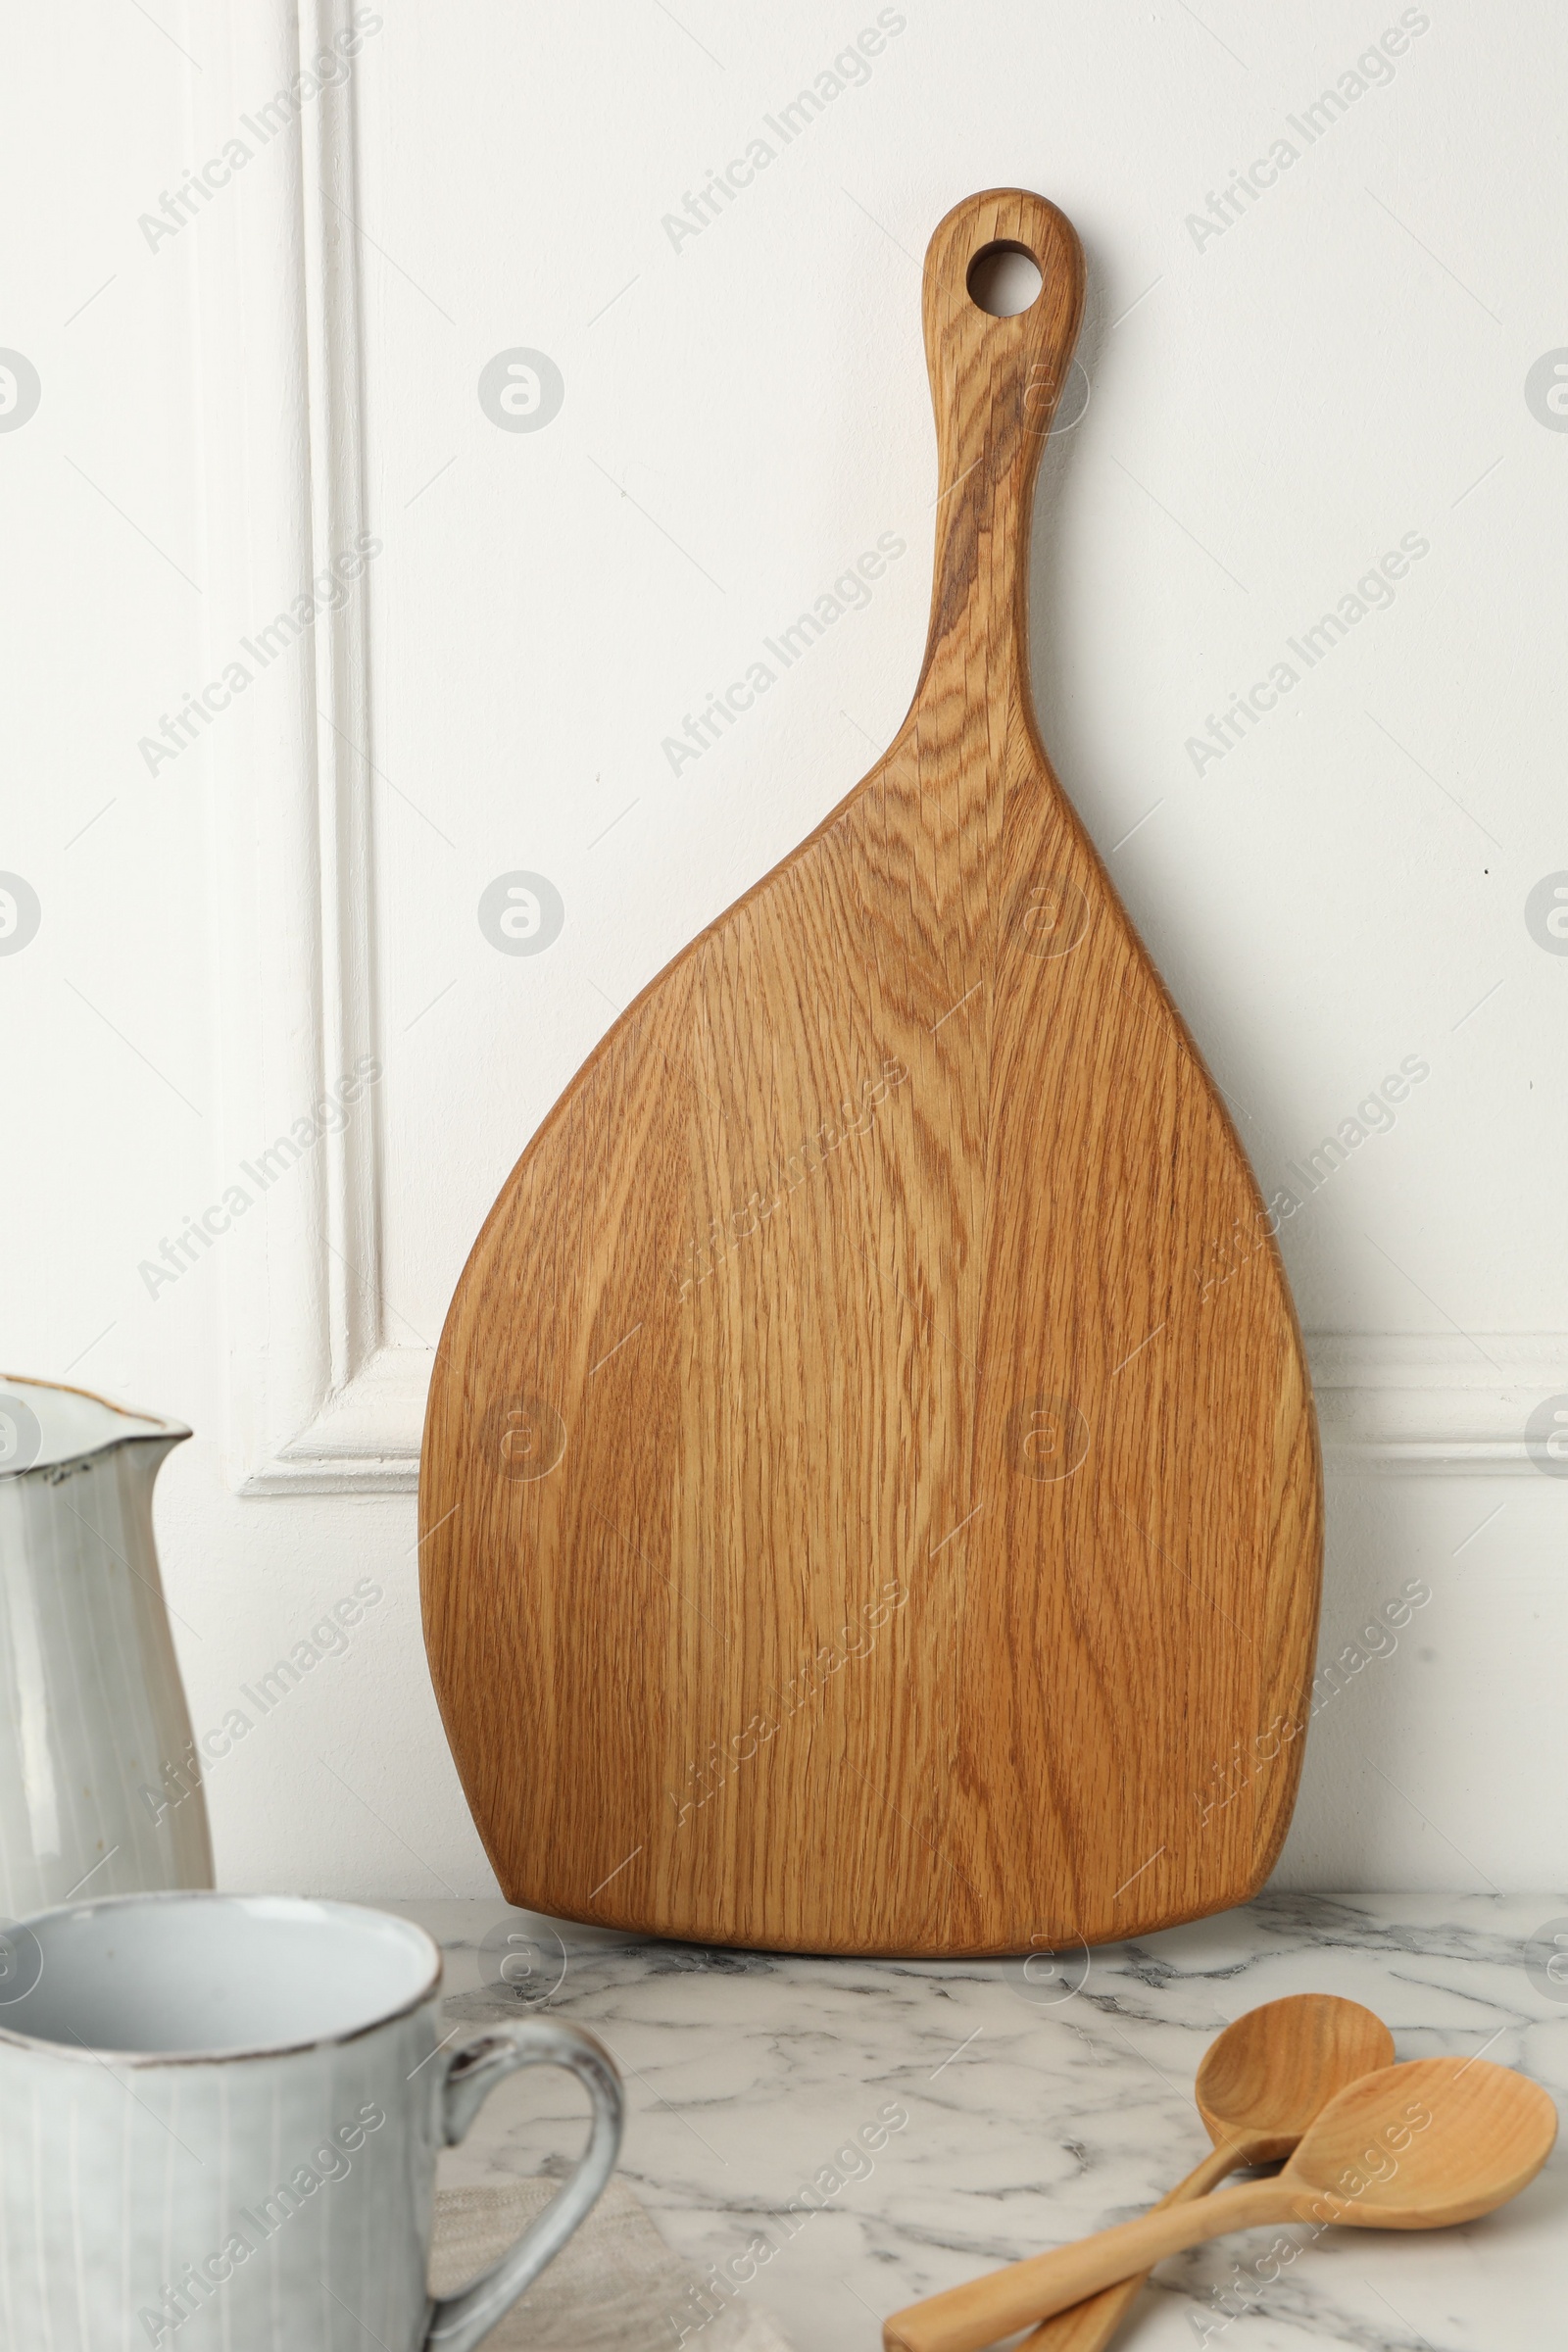 Photo of Wooden cutting board, spoons and dishware on white marble table